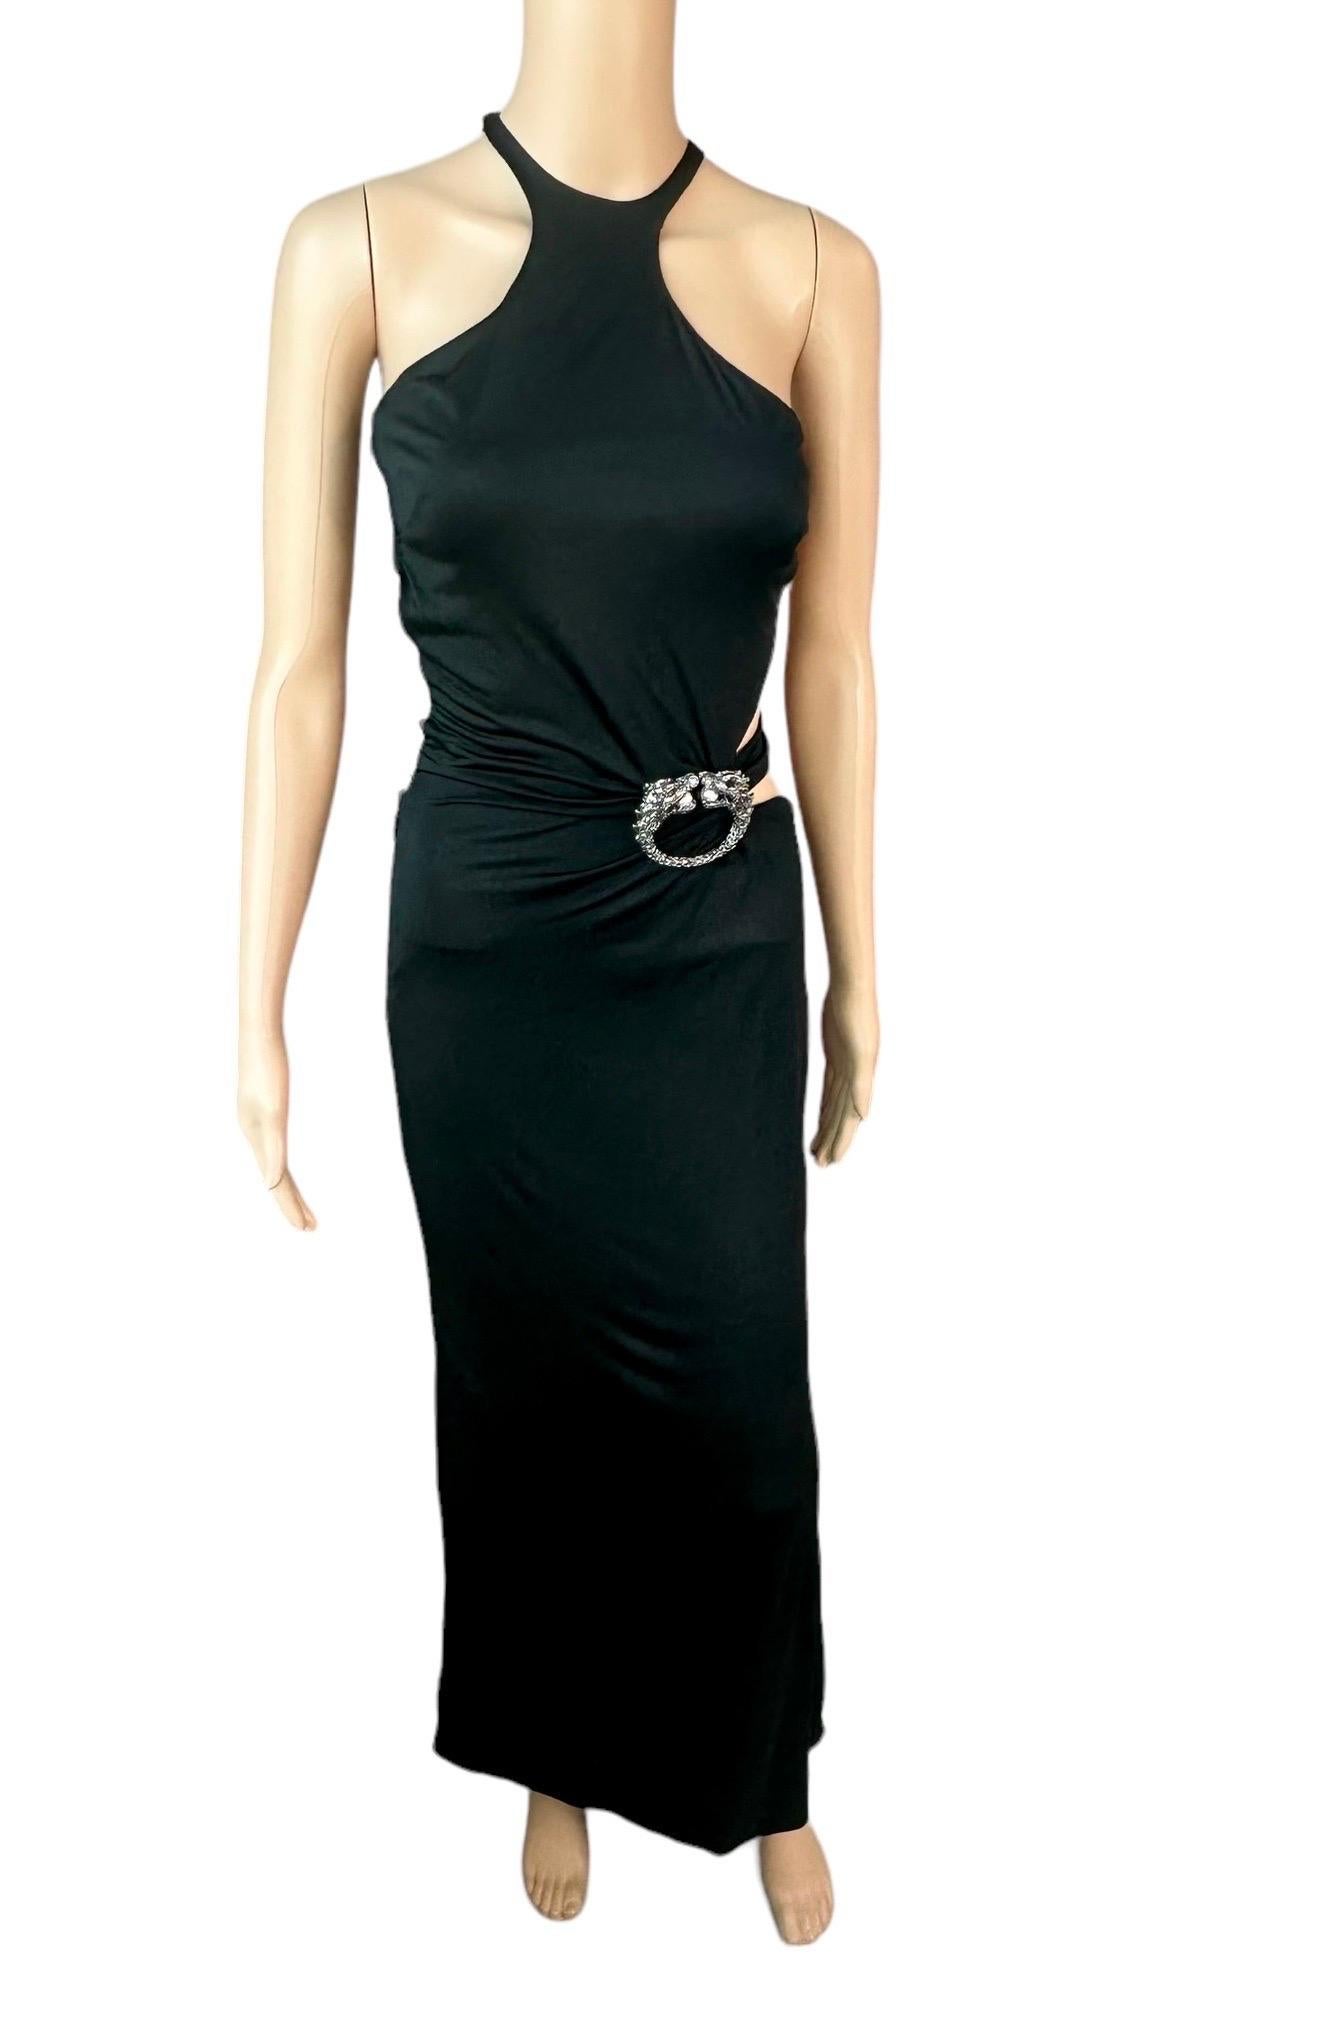 Tom Ford for Gucci F/W 2004 Embellished Plunging Cutout Black Evening Dress Gown For Sale 9